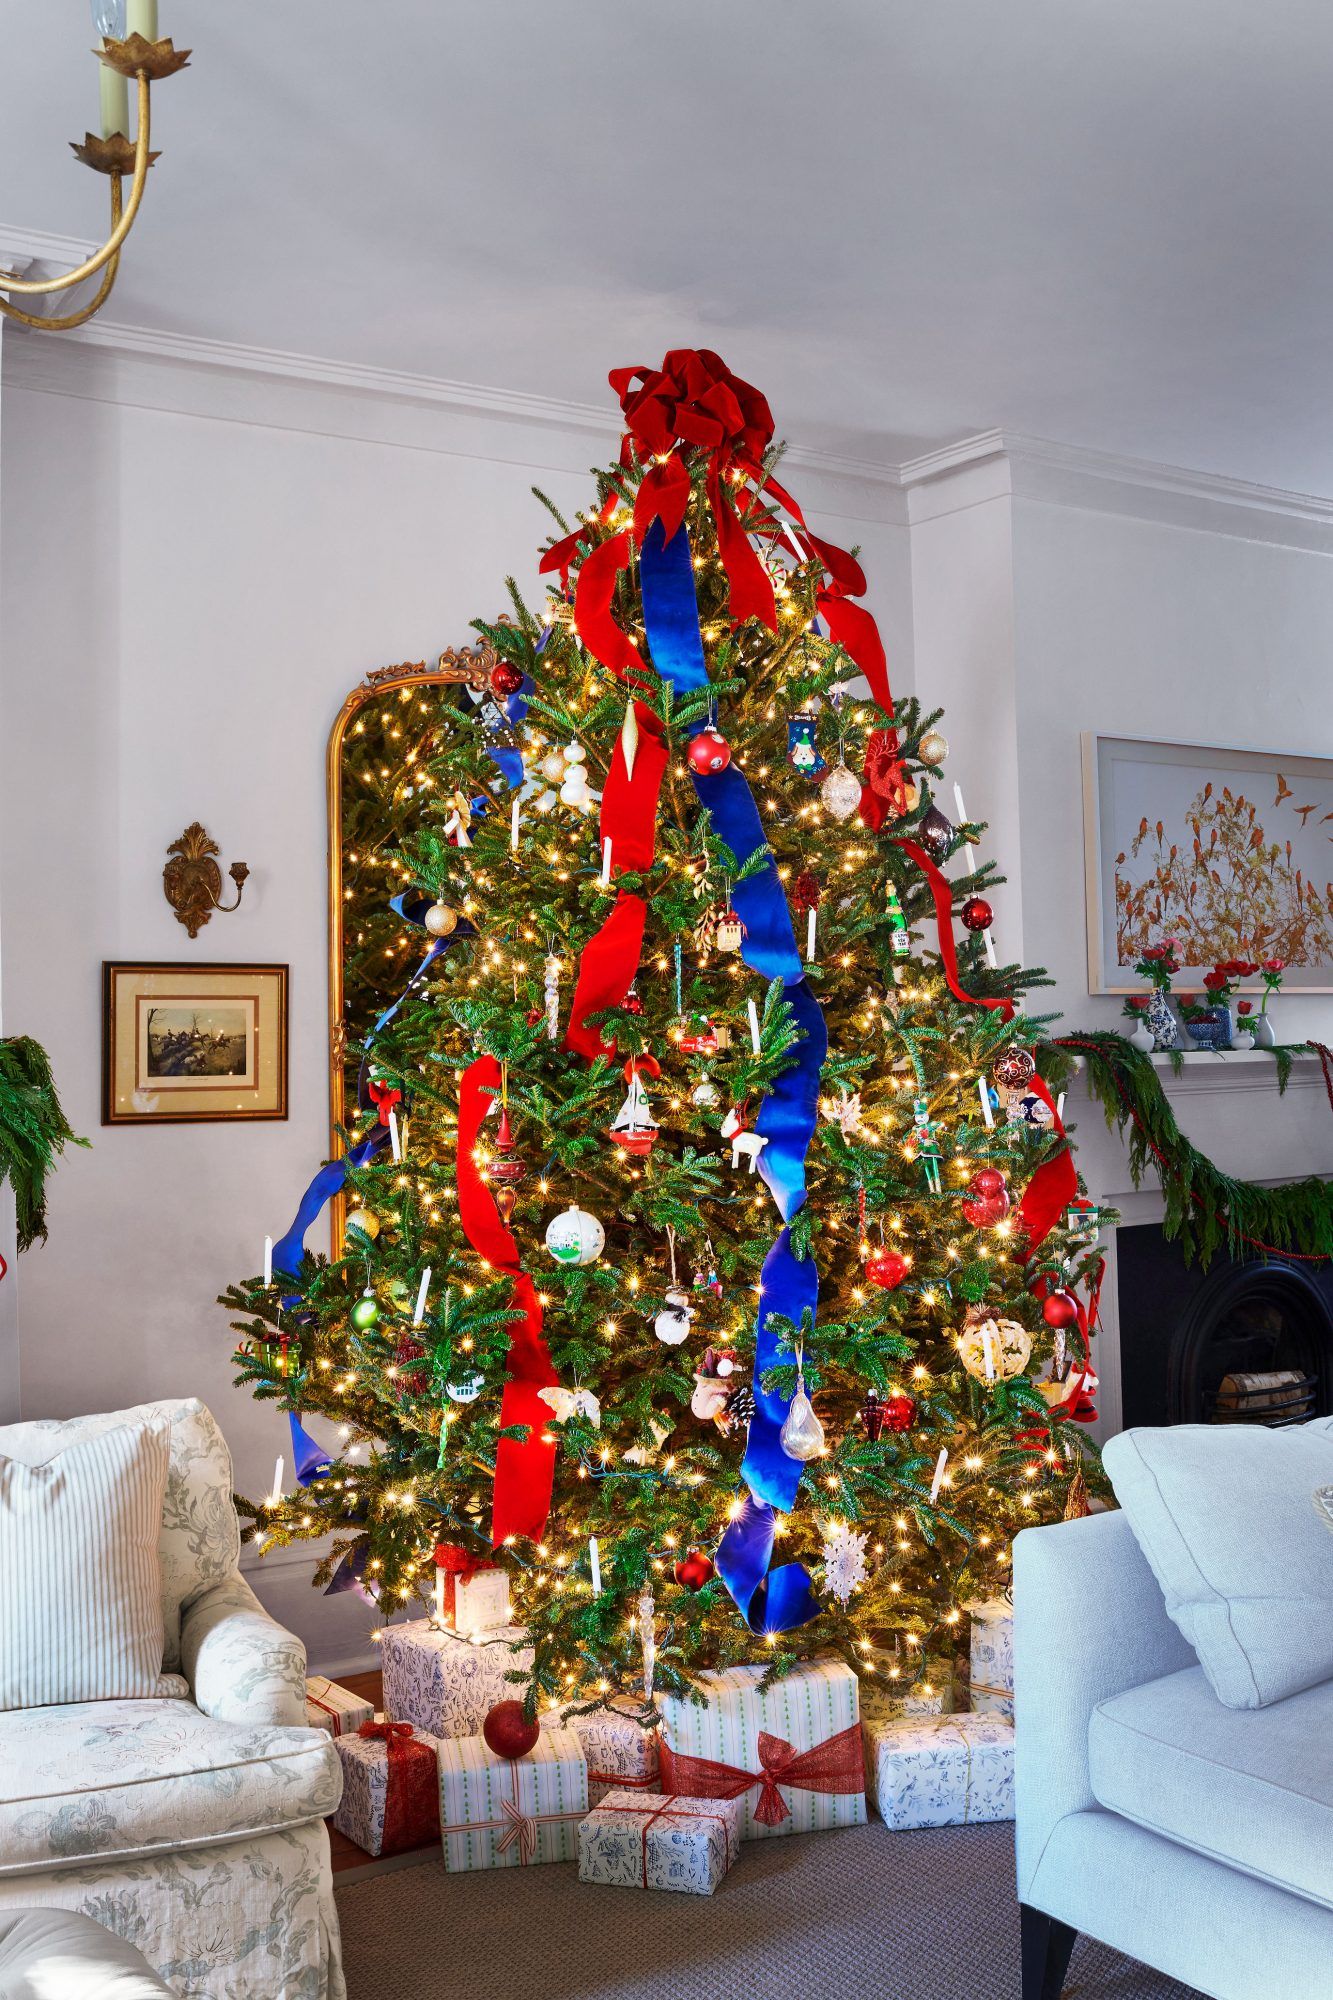 Decorate your tree with strong colors